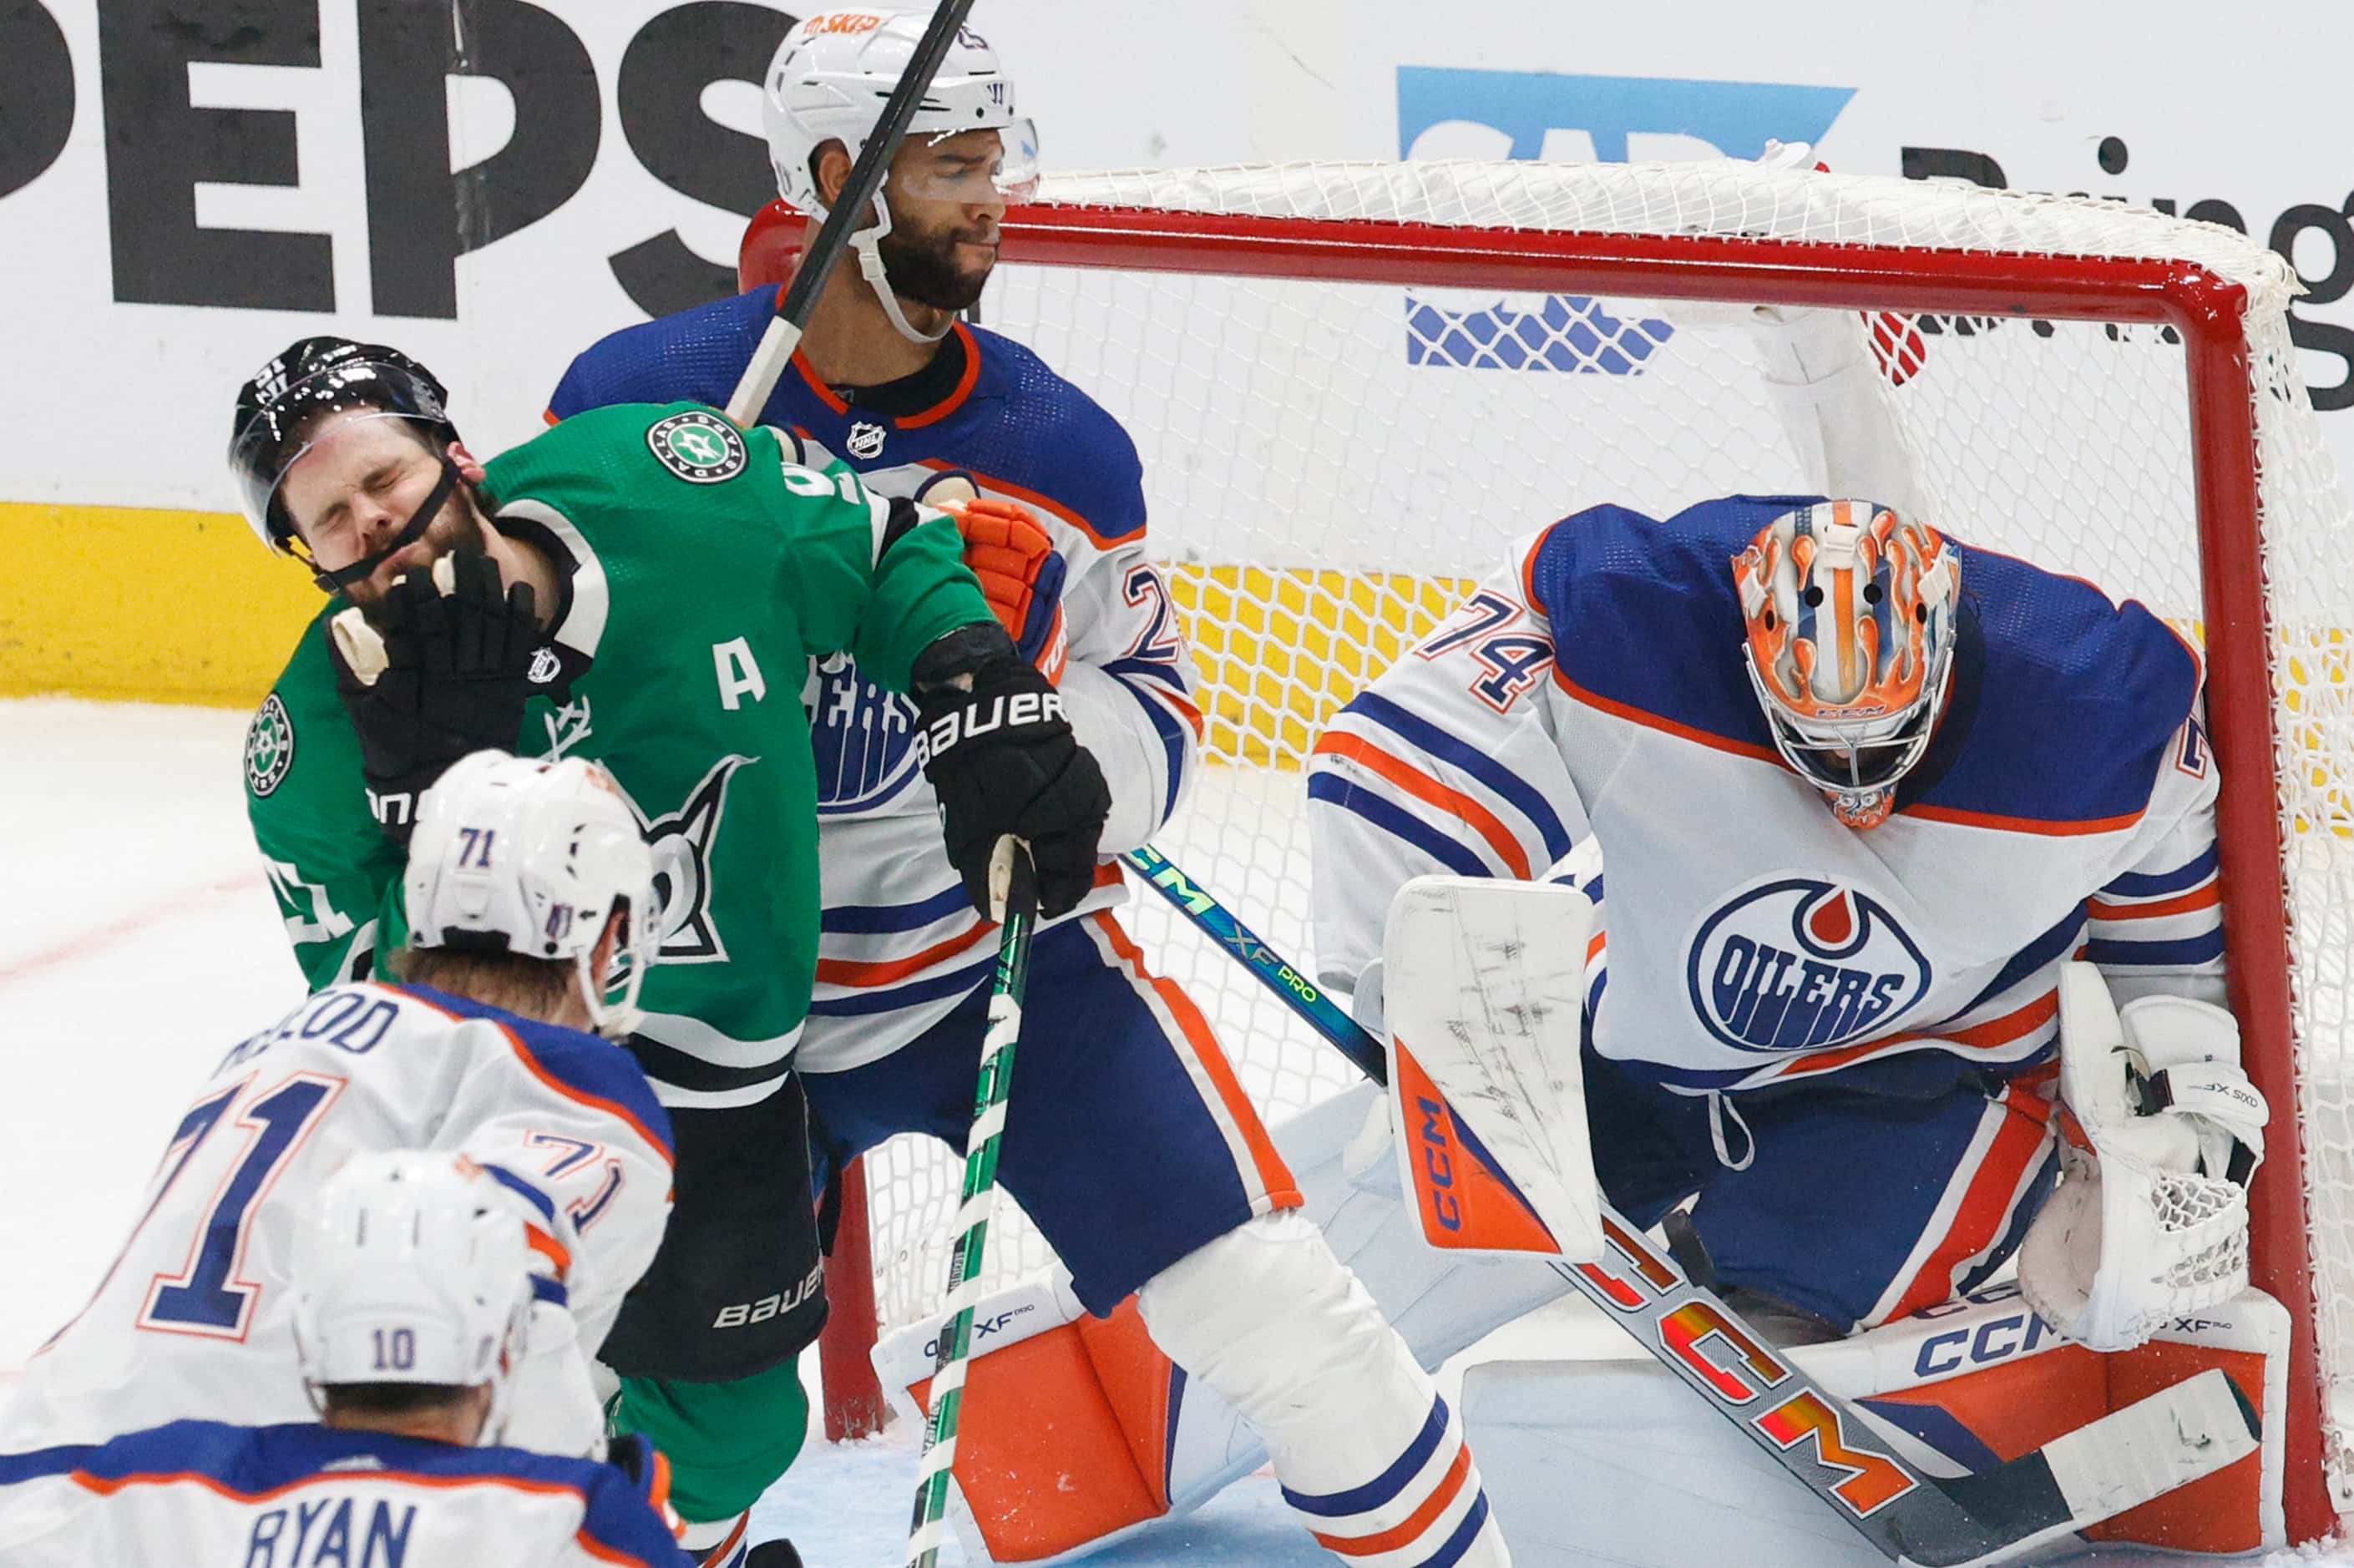 Dallas Stars center Tyler Seguin (91) is hit in the face during competing against Edmonton...